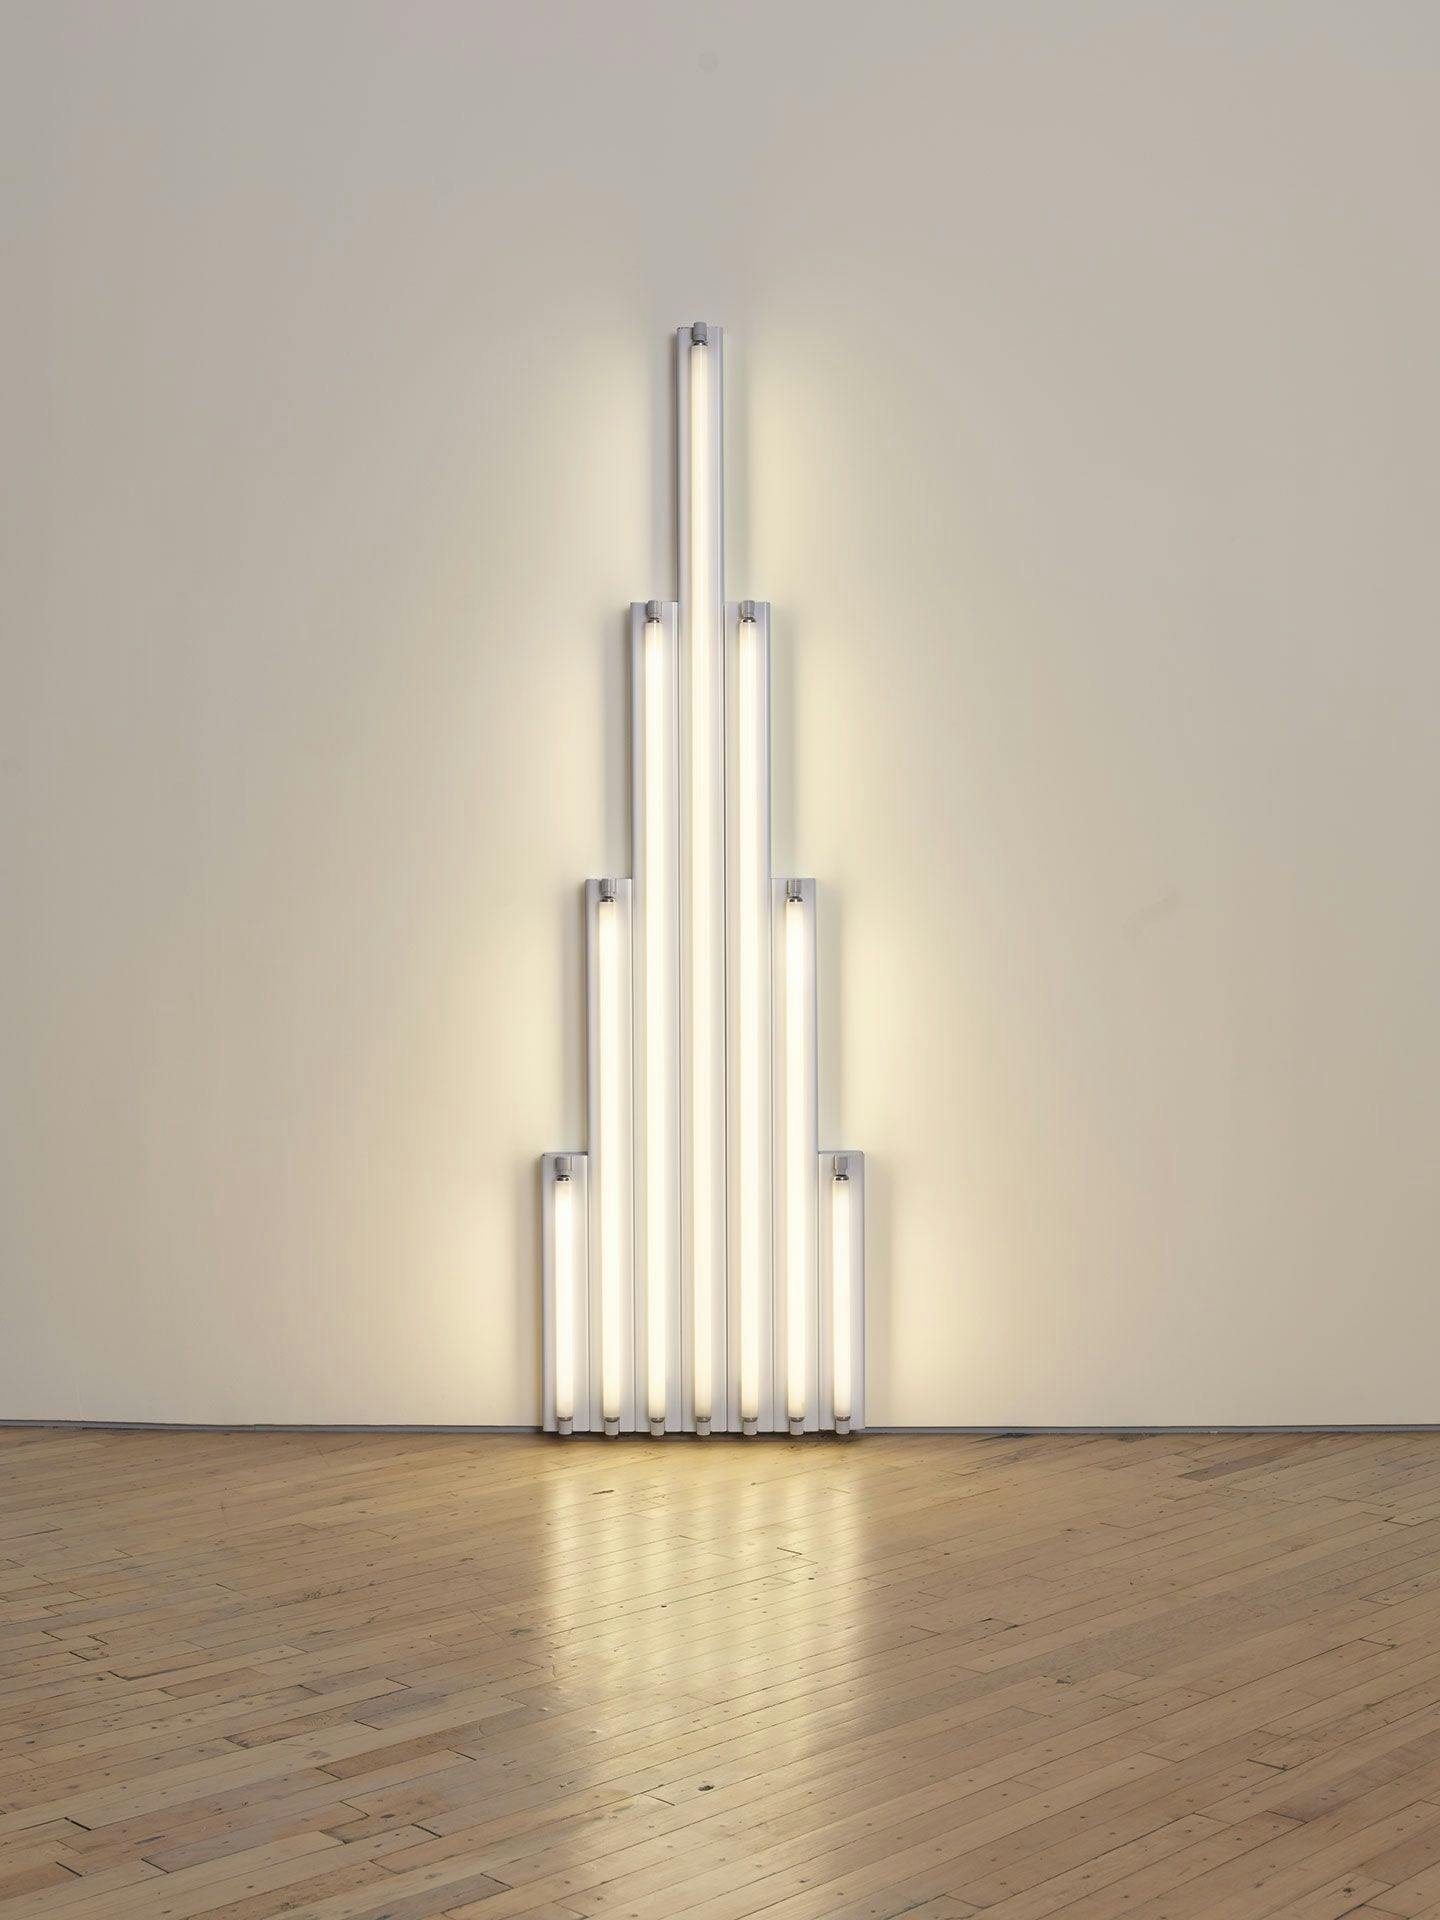 A sculpture in cool white fluorescent light by Dan Flavin, titled "monument" 1 for V. Tatlin, dated 1964.